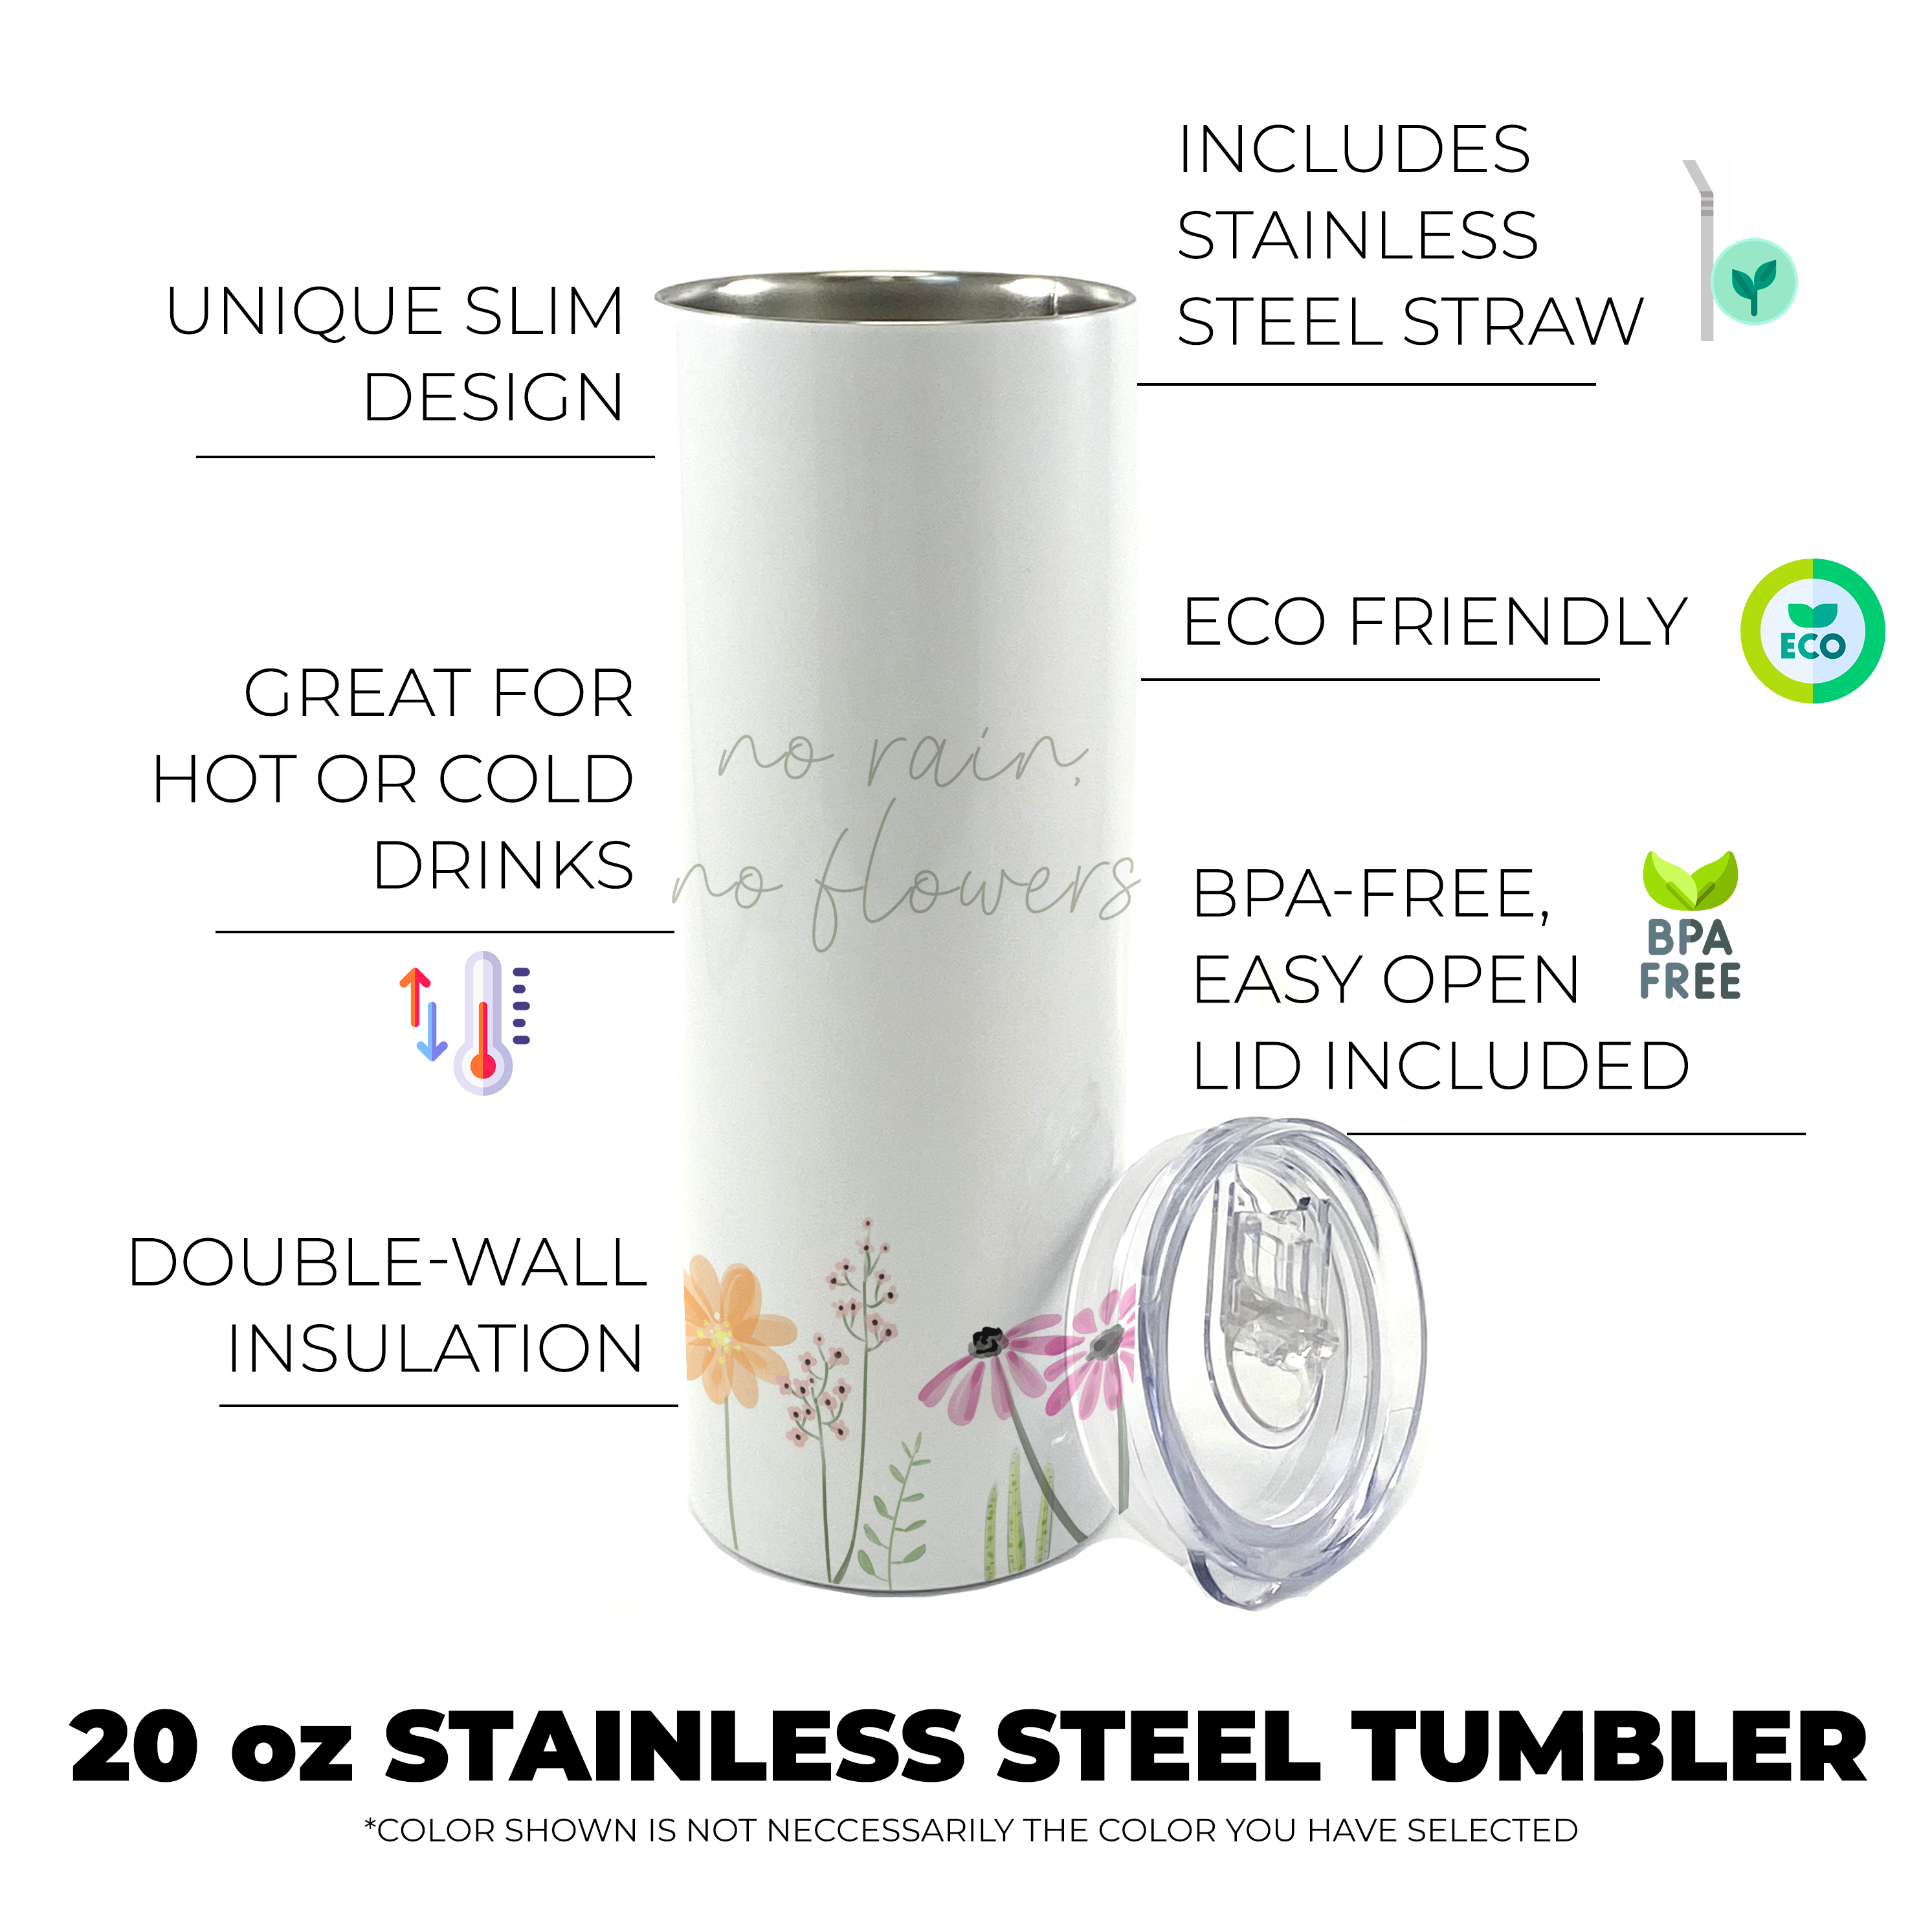 Trend Setters Originals (No Rain, No Flowers) 20 Oz Stainless Steel Travel Tumbler with Straw